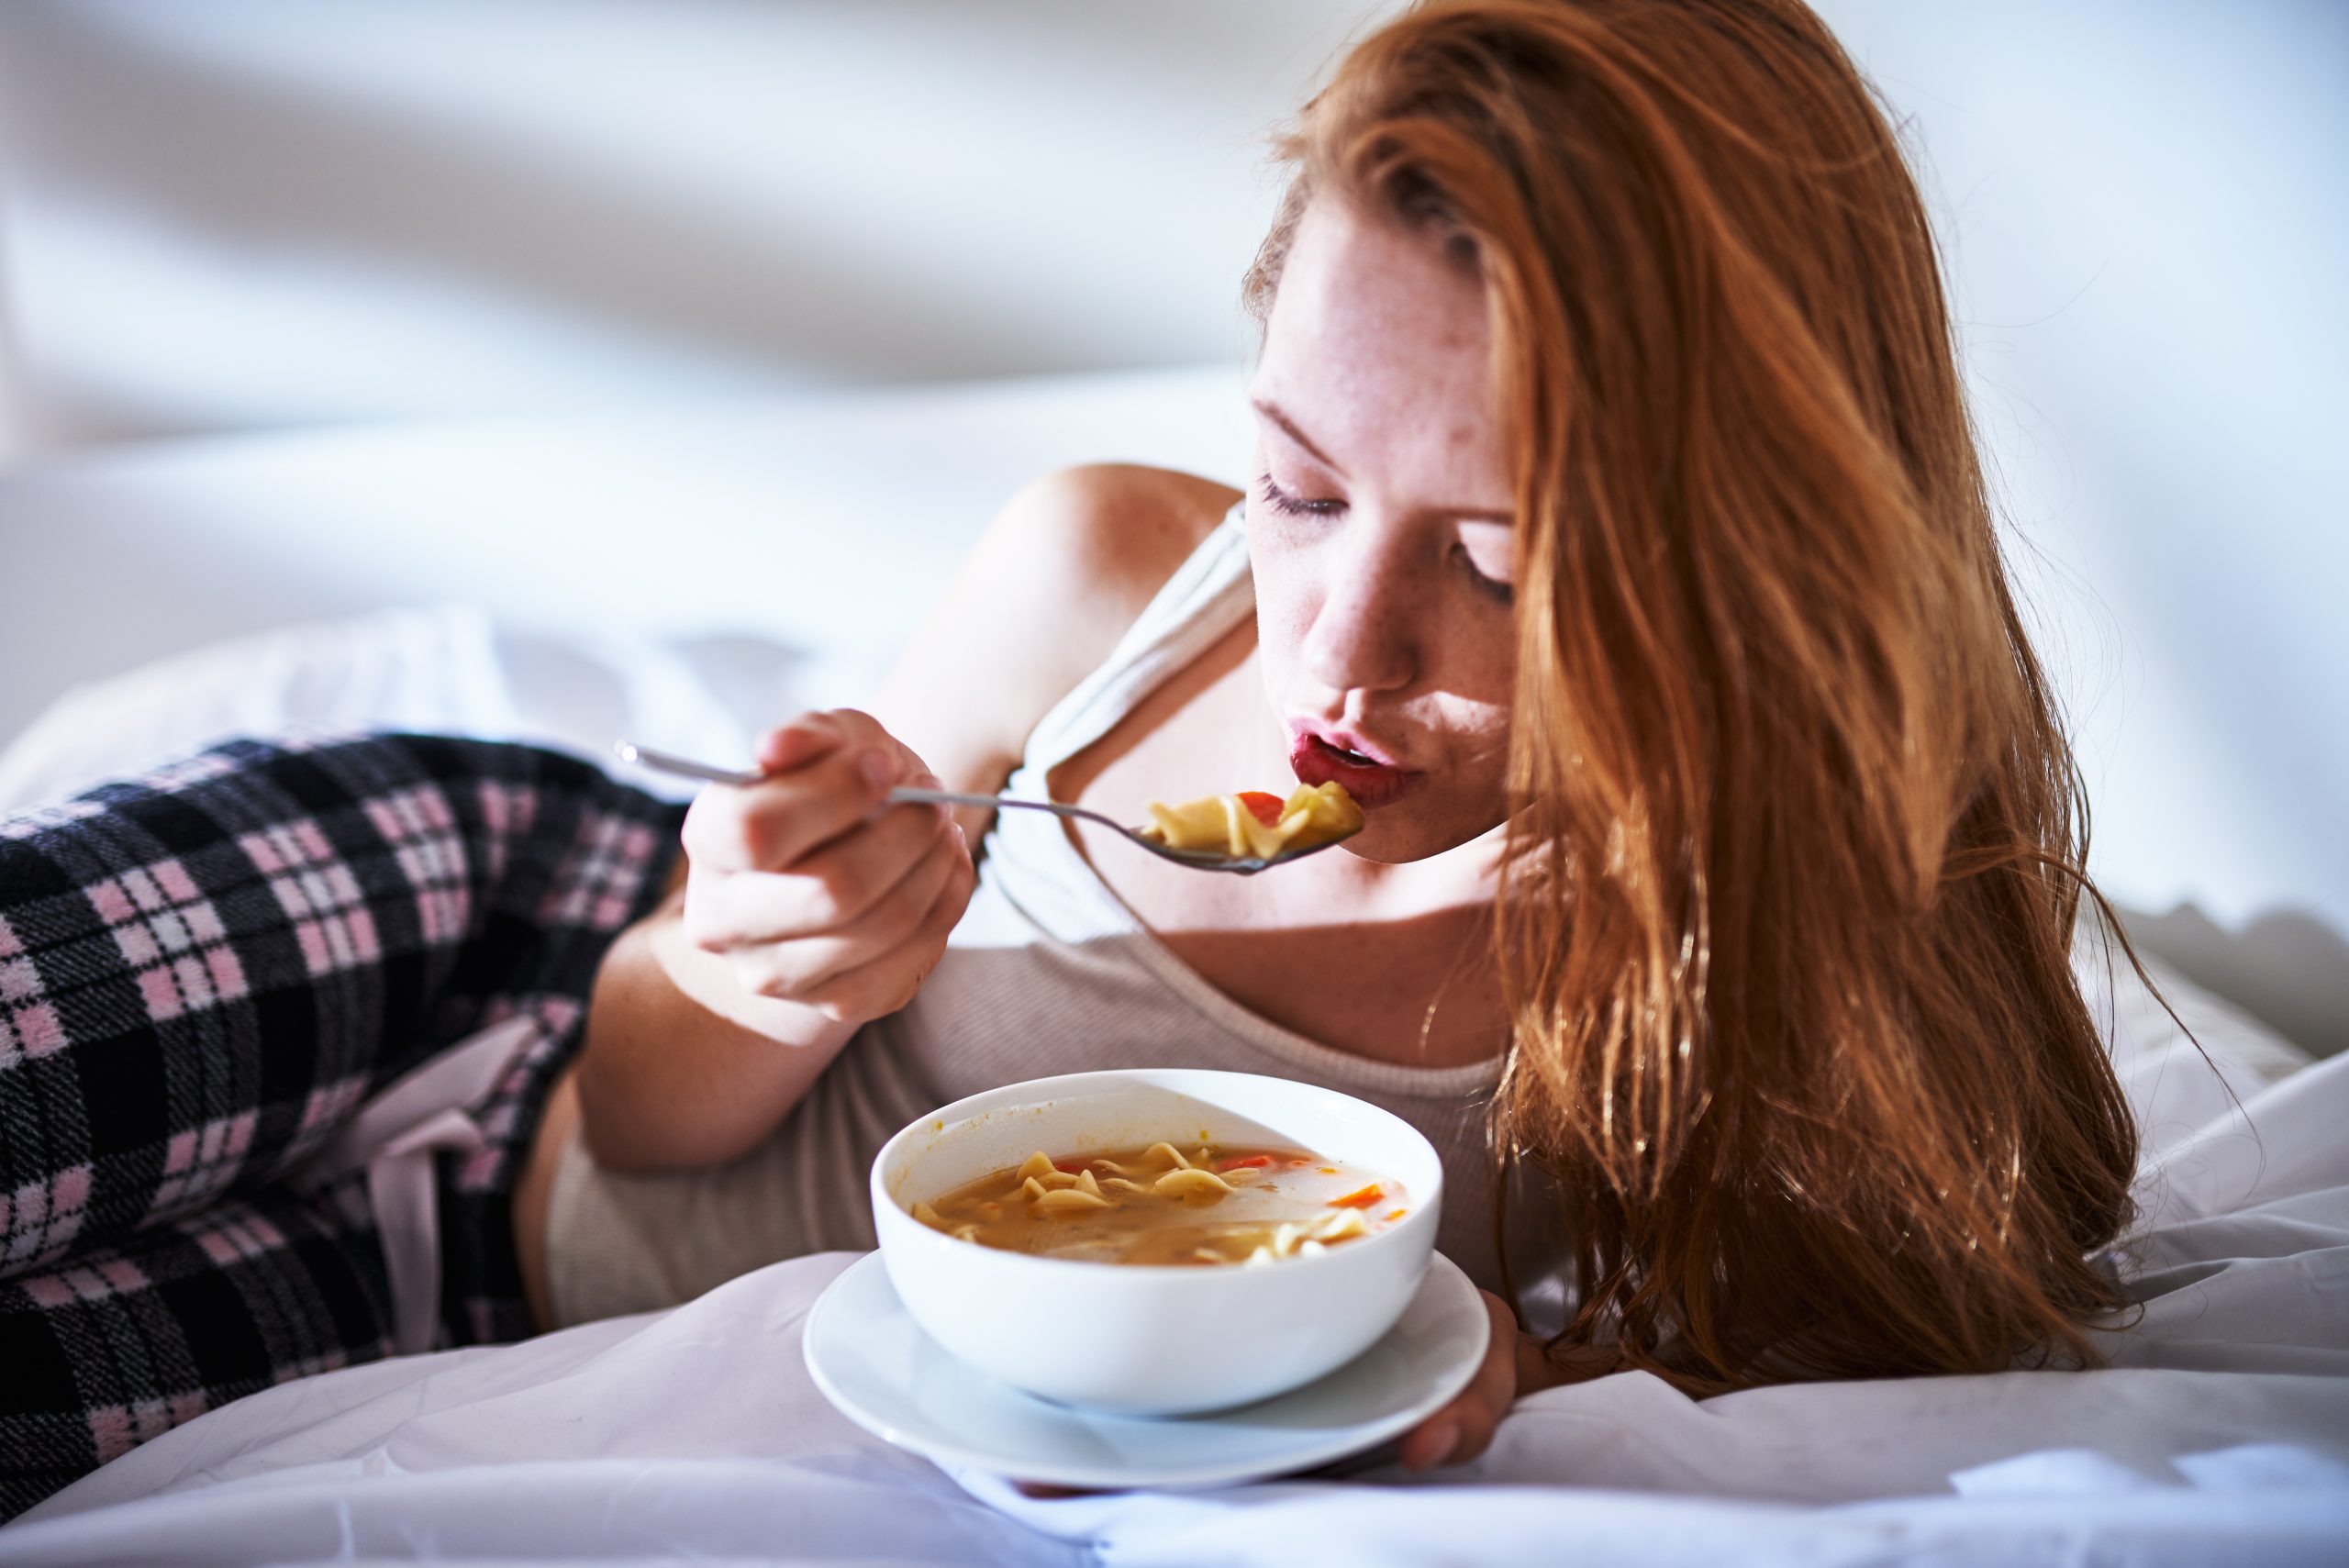 Diet and Health: What to Eat (and not eat) When You Are Sick